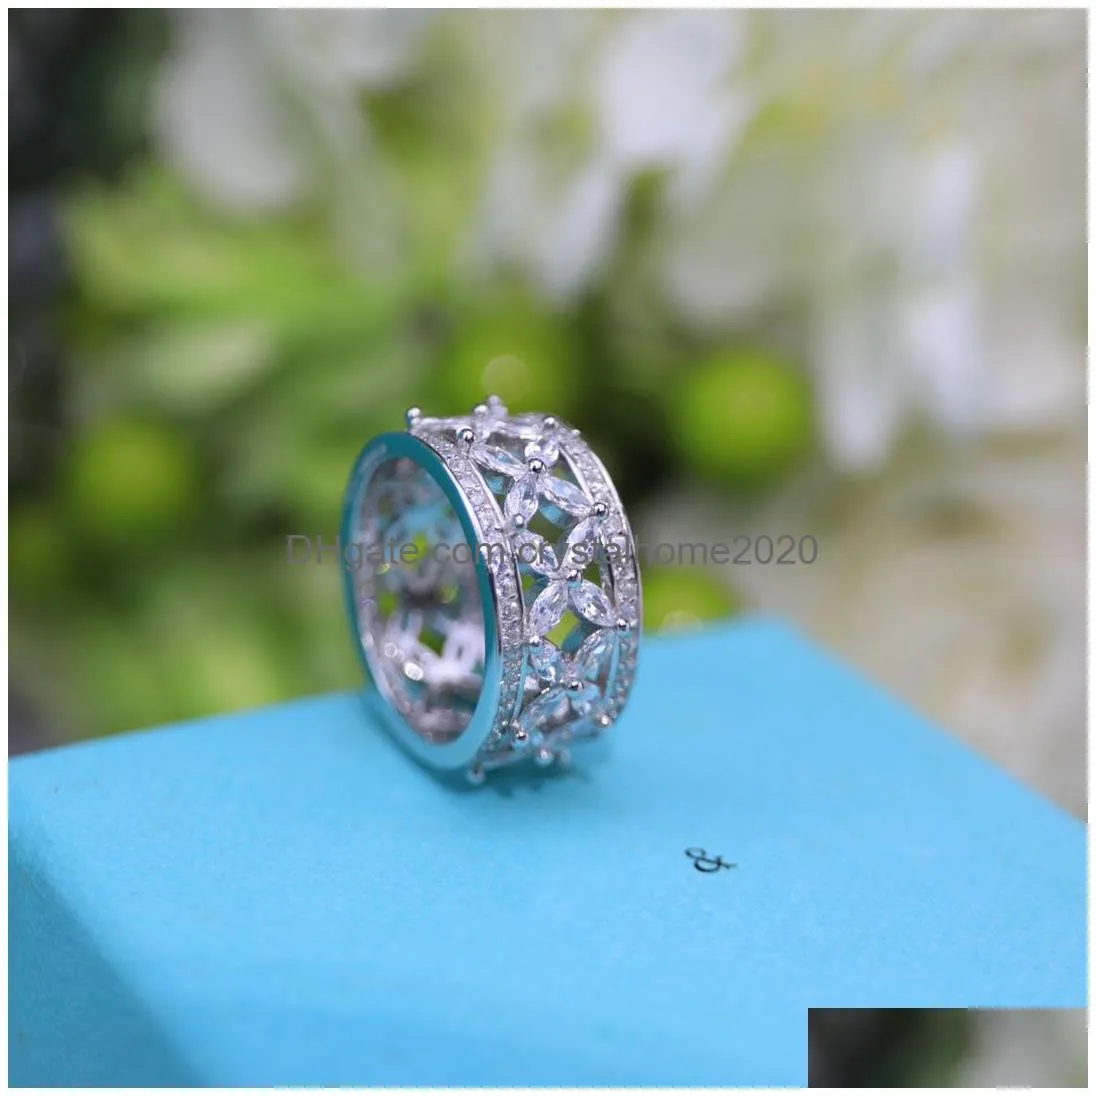 Band Rings Designers Ring Fashion Women Jewelrys Gift S Diamond Sier Rings Designer Couple Jewelry Gifts Simple Personalized Style Pa Dhu9O